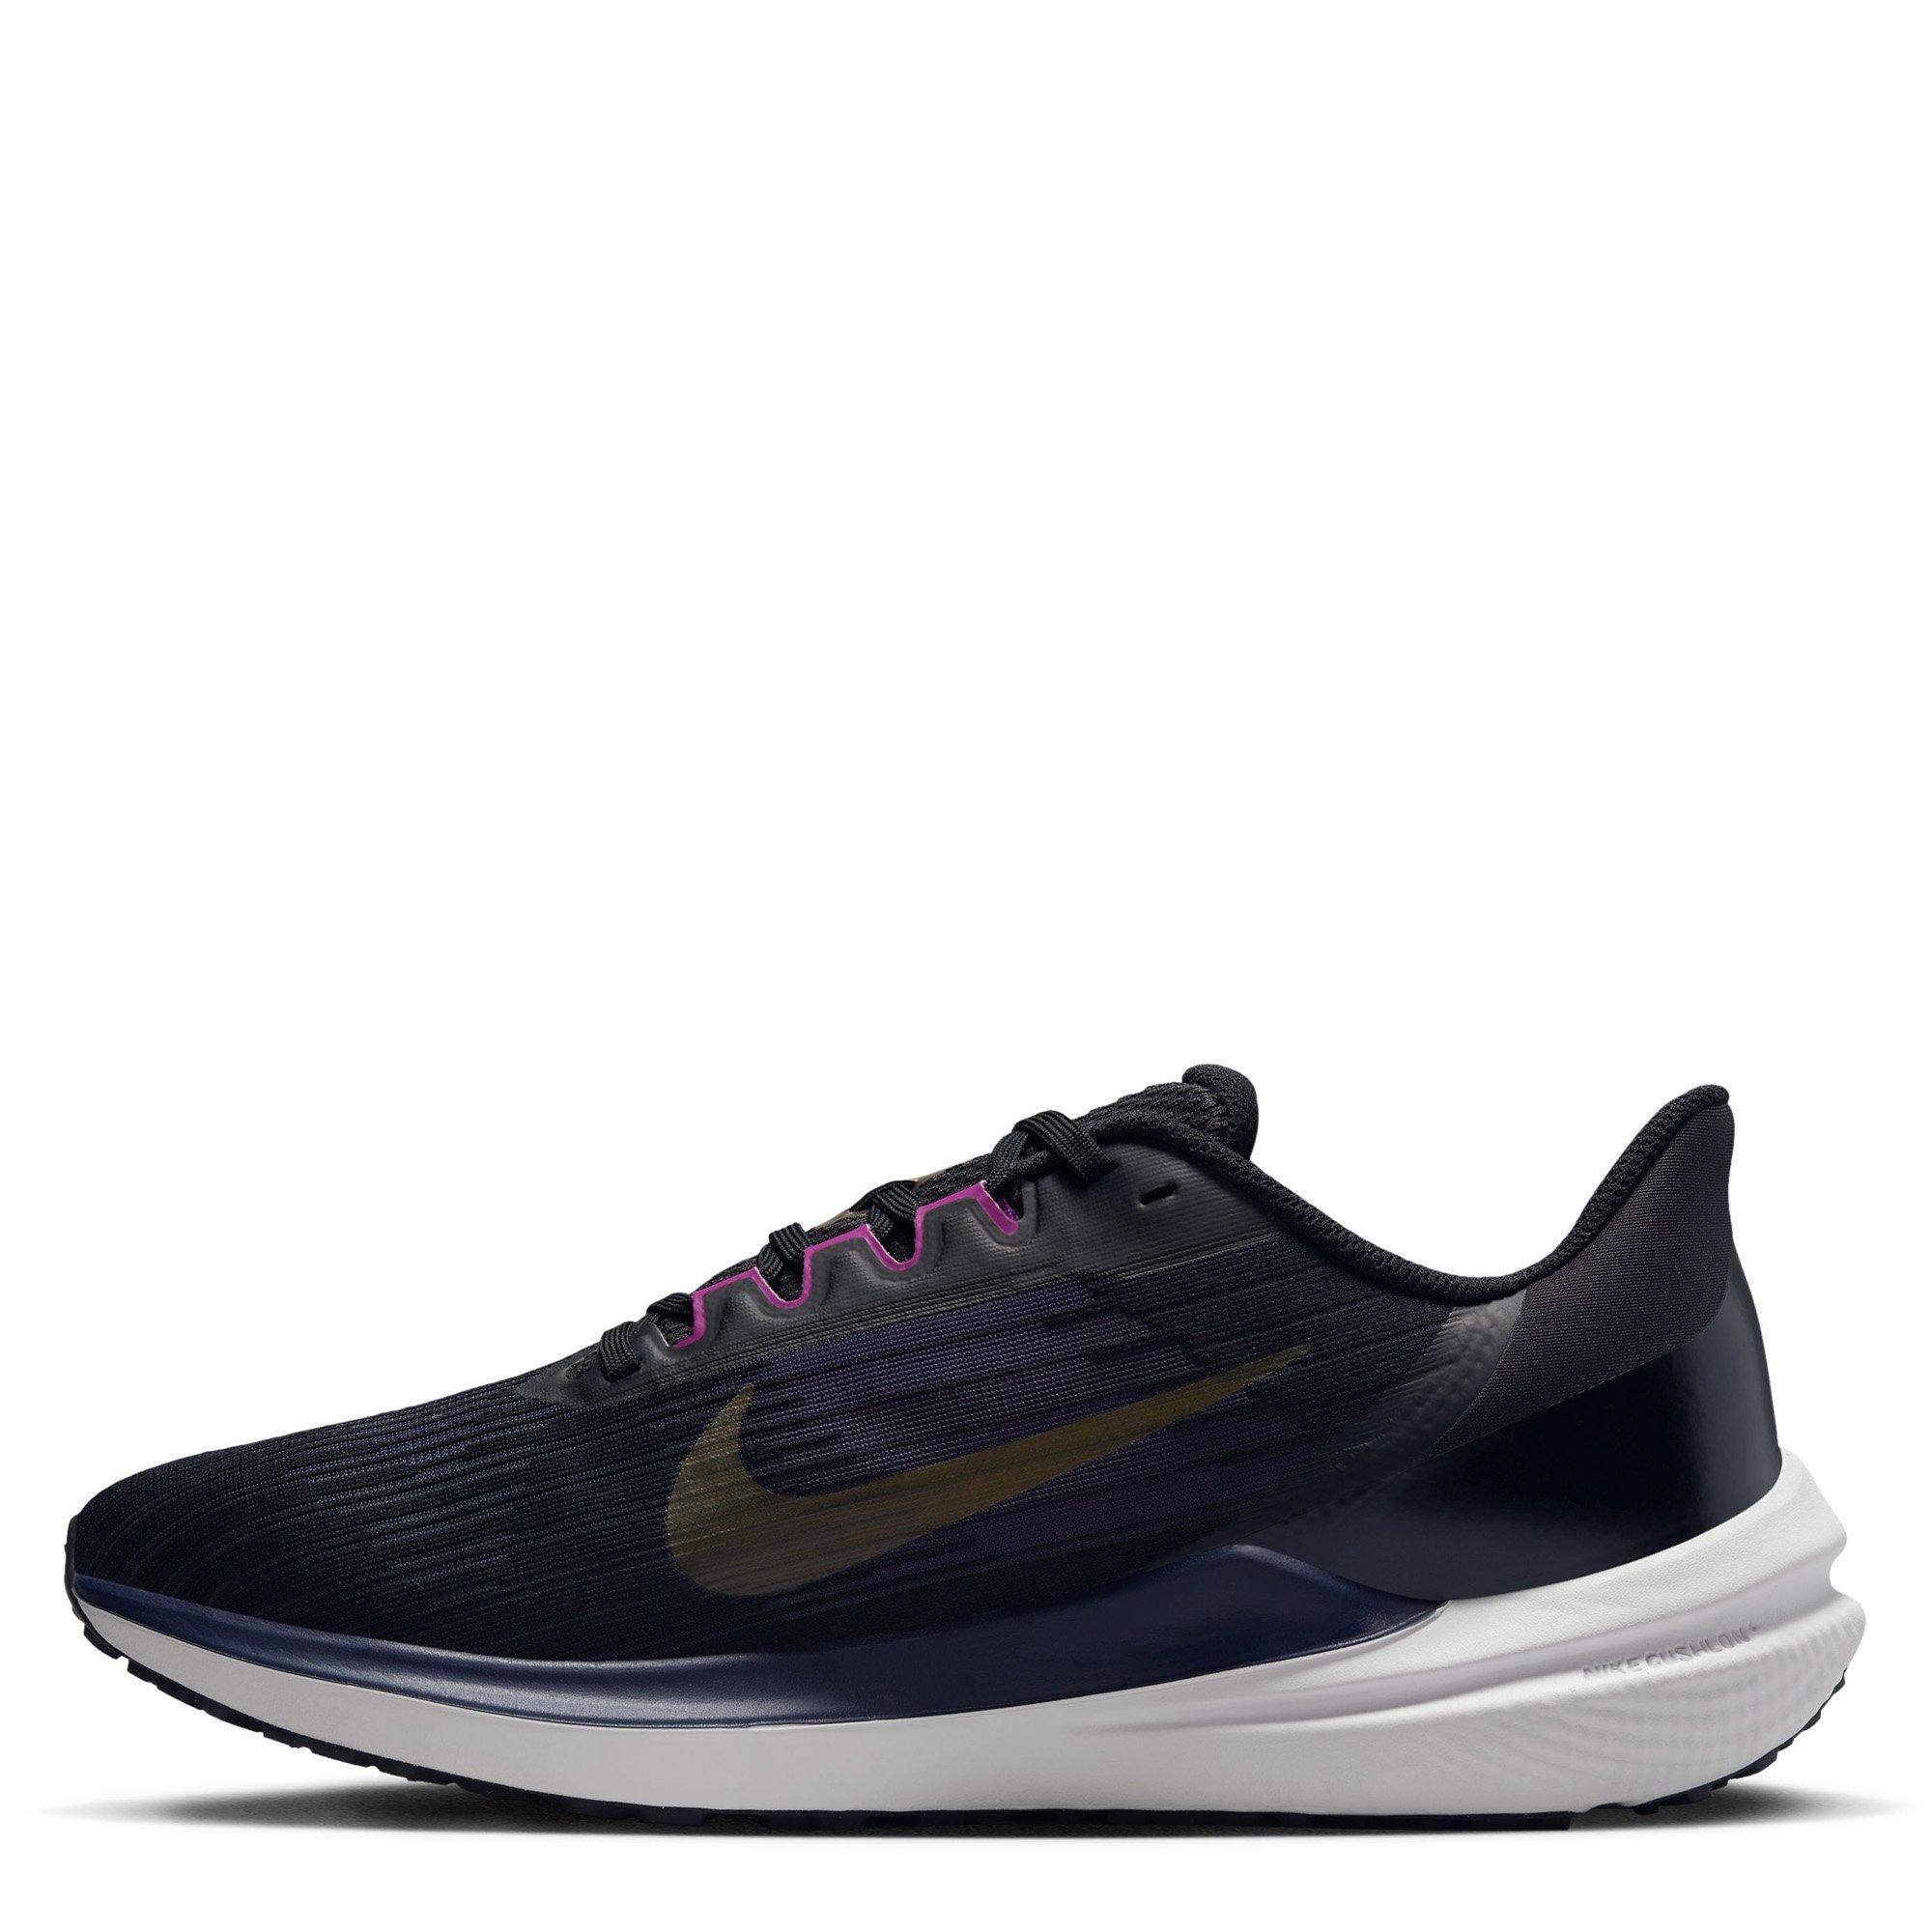 Nike | Air Winflo 9 Mens Running Shoes | Everyday Neutral Road Running ...